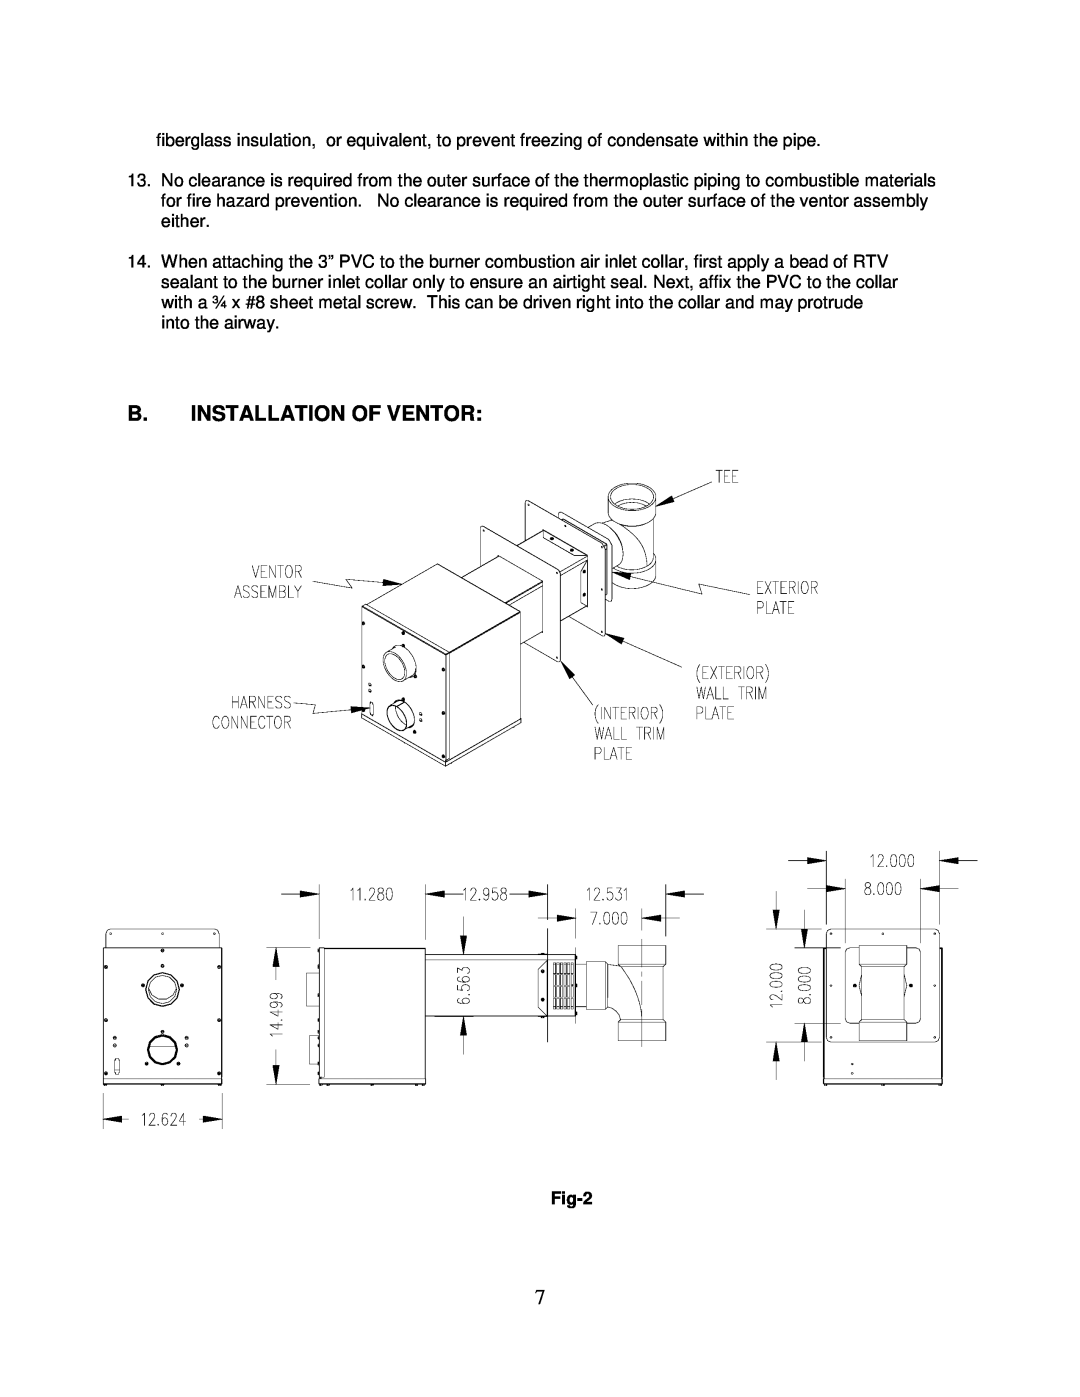 Thermo Products PHCFA072DV4R operation manual B.Installation Of Ventor, Fig-2 